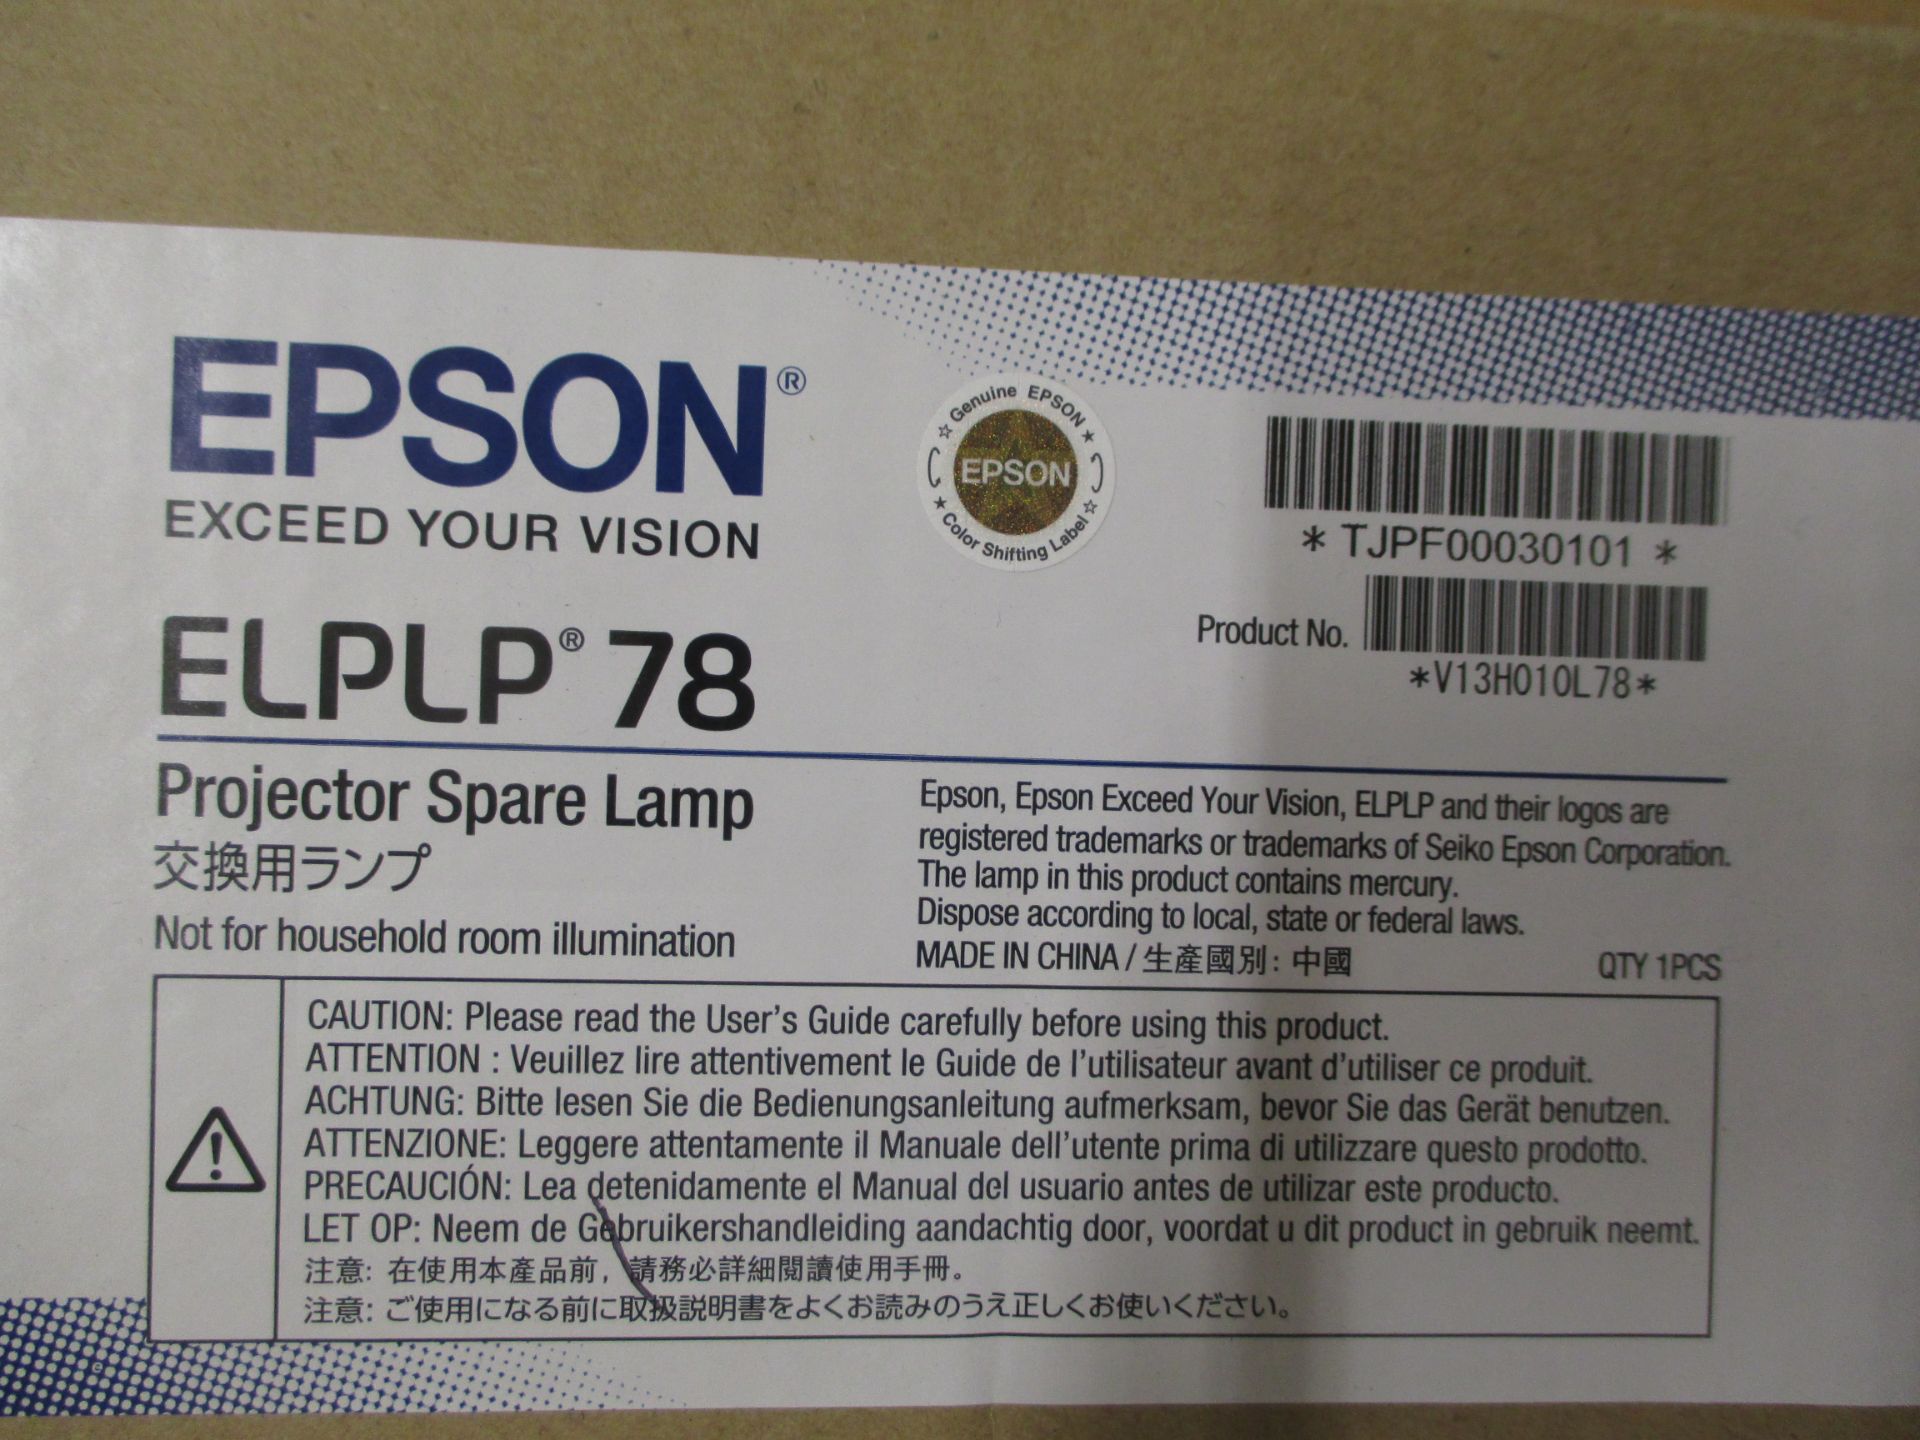 EPSON ELPLP 78 PROJECTOR LAMP. BOX OPEN. CONTENTS UNUSED